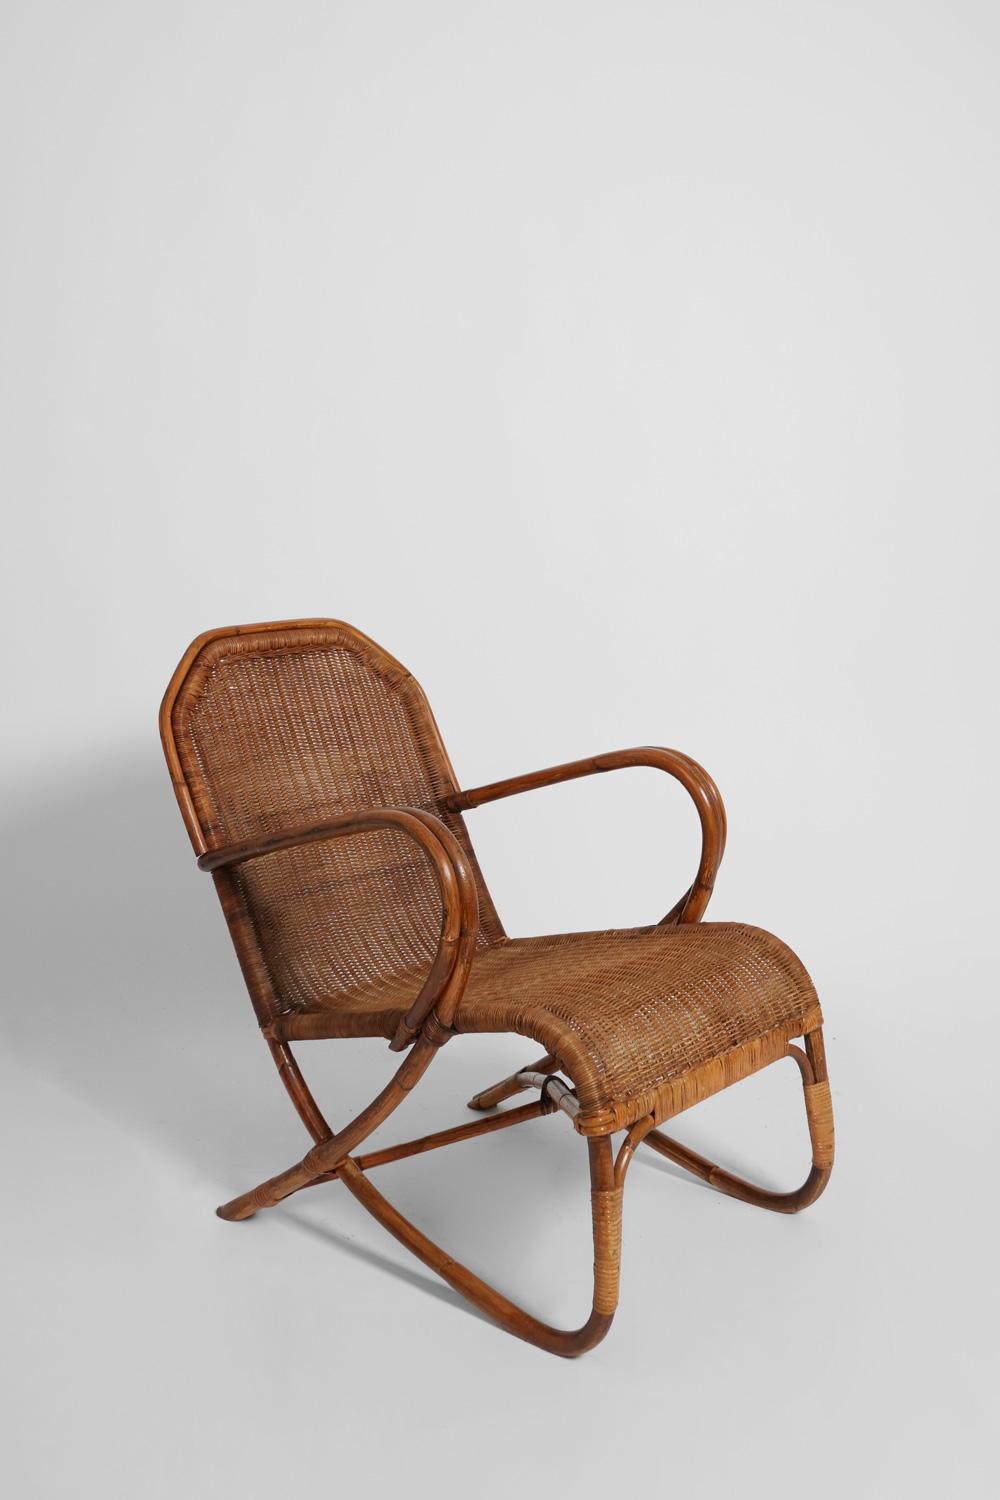 Pair of rattan and wicker armchairs. France, 1950s.